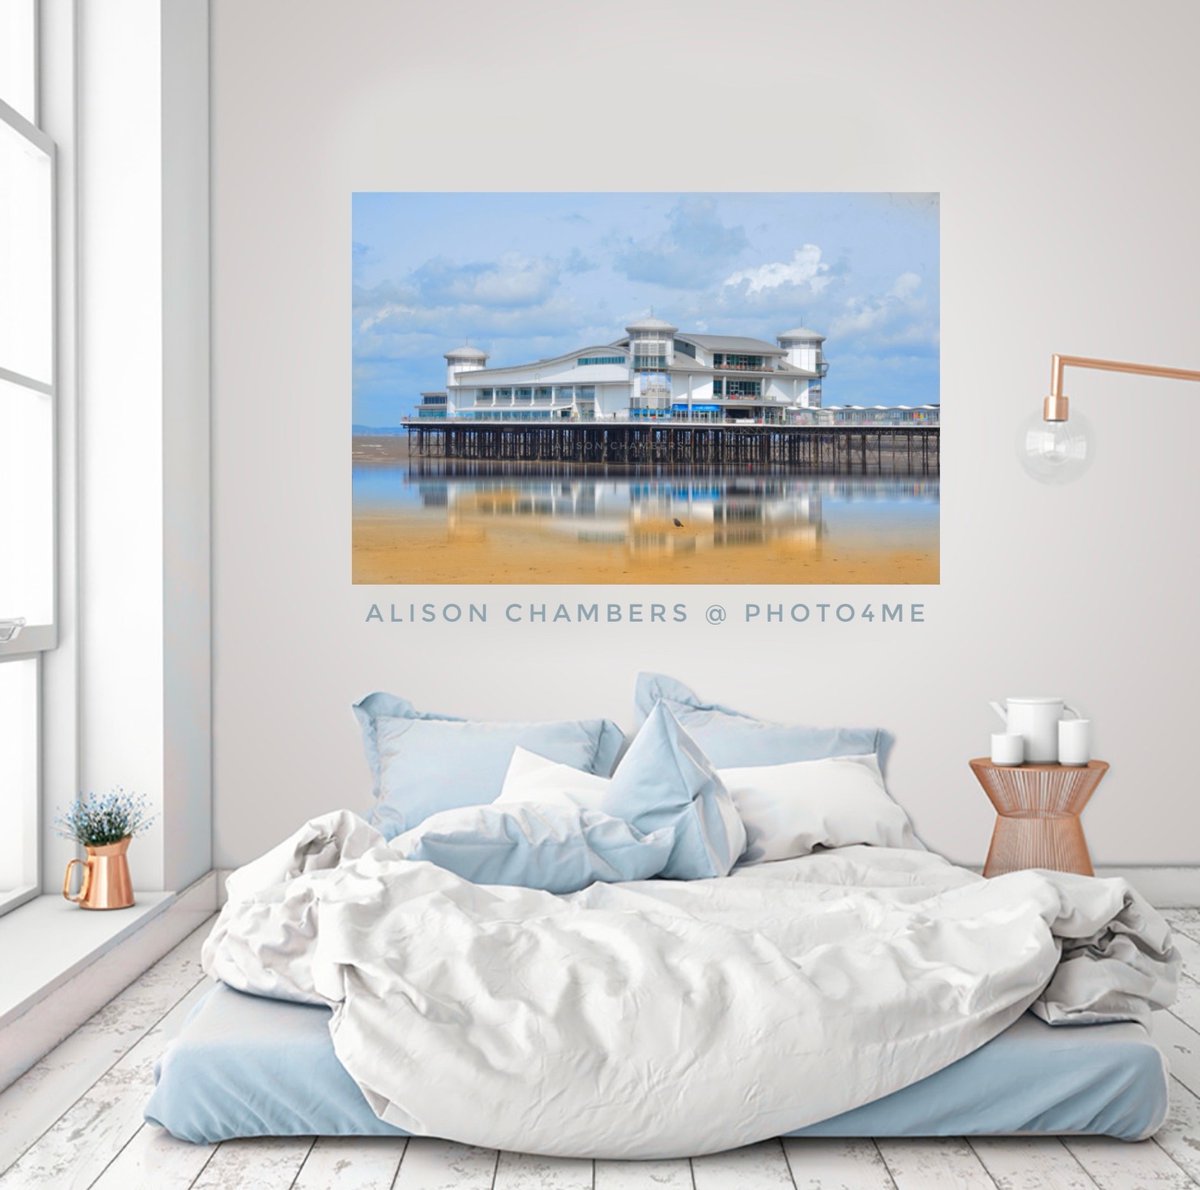 Grand Pier Weston-super-Mare©️. Available from; shop.photo4me.com/1289753 & alisonchambers2.redbubble.com & 2-alison-chambers.pixels.com #wsm #grandpierwsm #wsmgrandpier #WestonsuperMare #westonsupermarebeach #weston #northsomersetcoast #northsomerset #somersetcoast #somerset